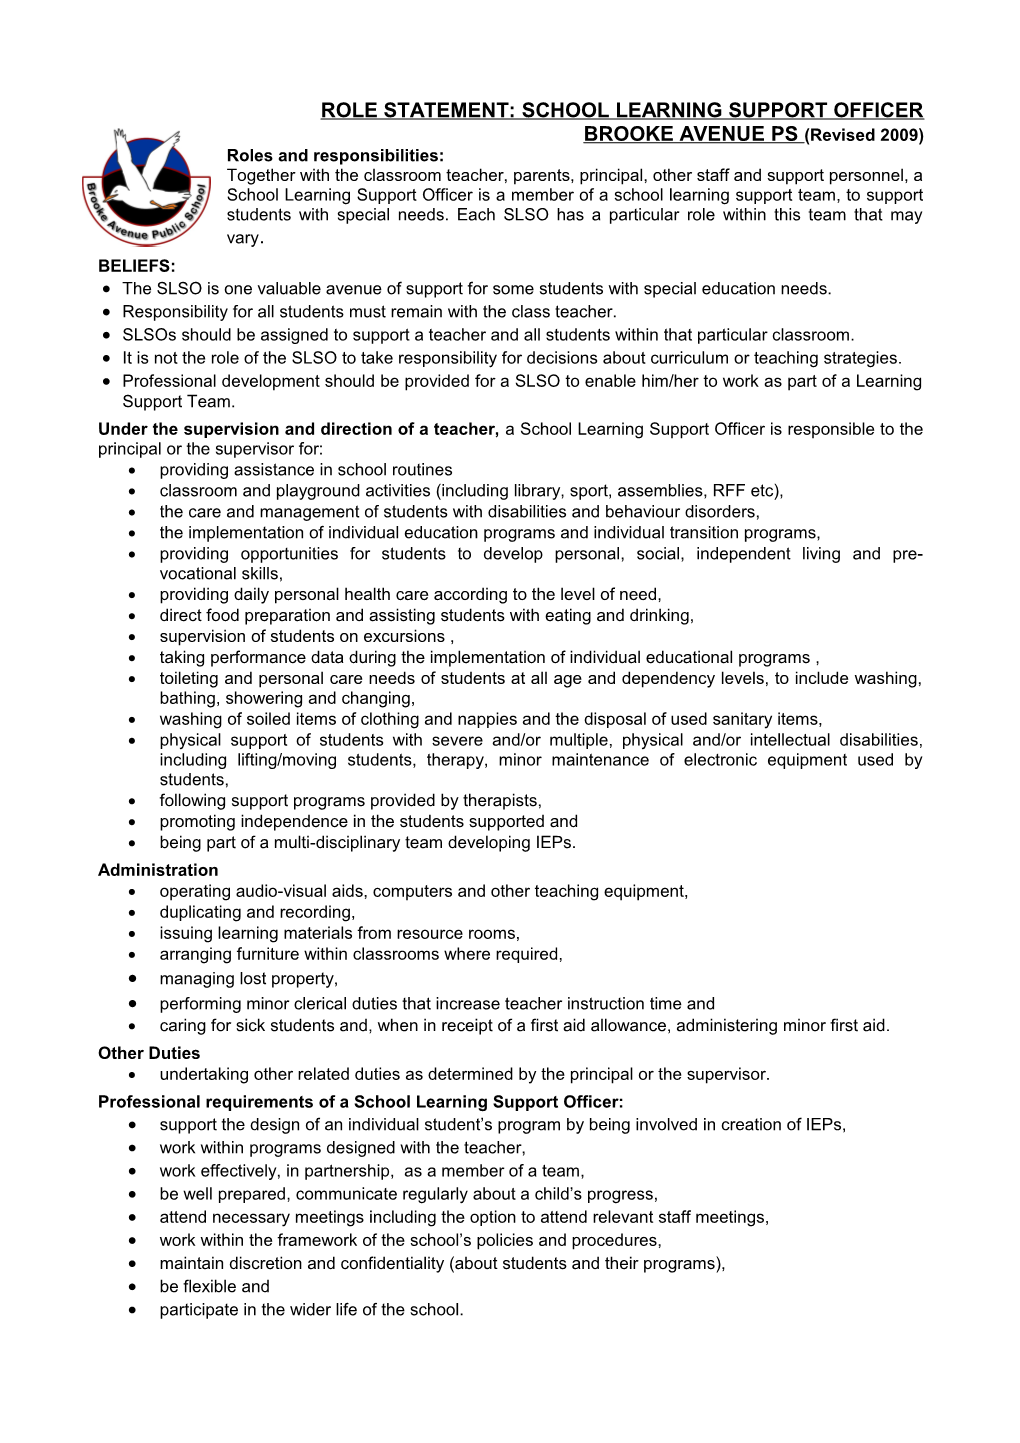 Roles and Responsibilities of Teachers Aides Special (TAS)